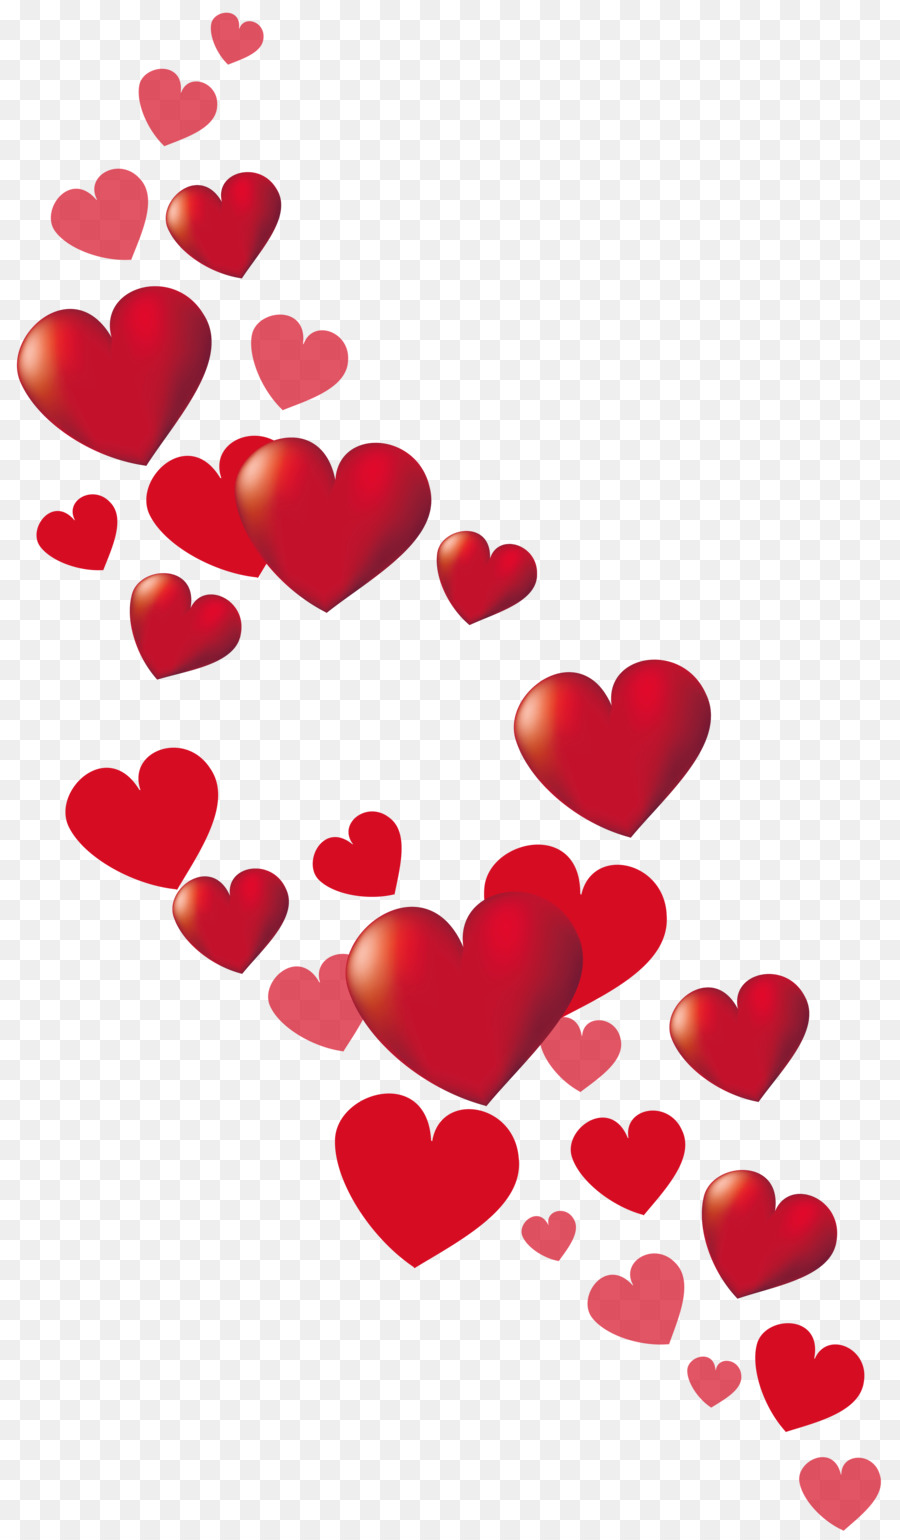 Love Background Heart png download.